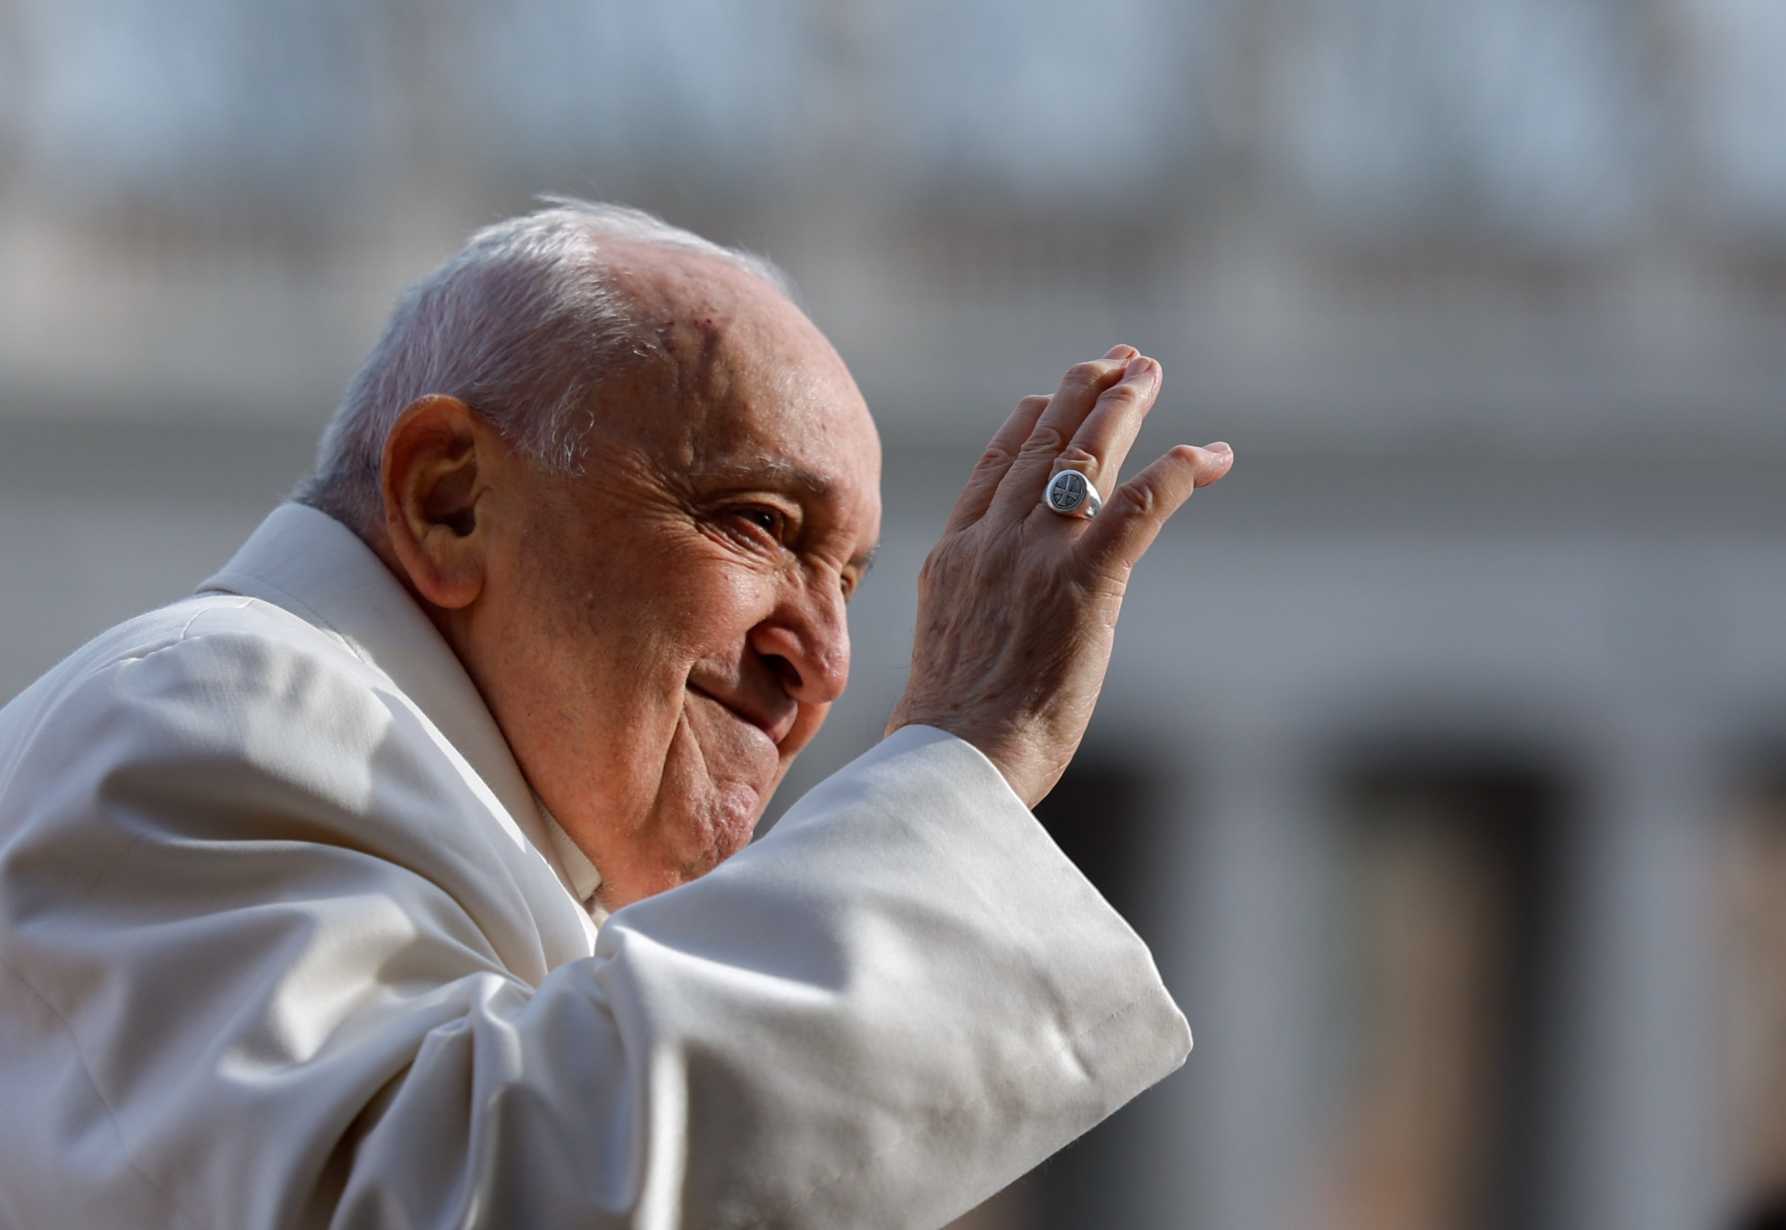 Saints are not 'exceptions,' but examples of humanity's virtue, pope says